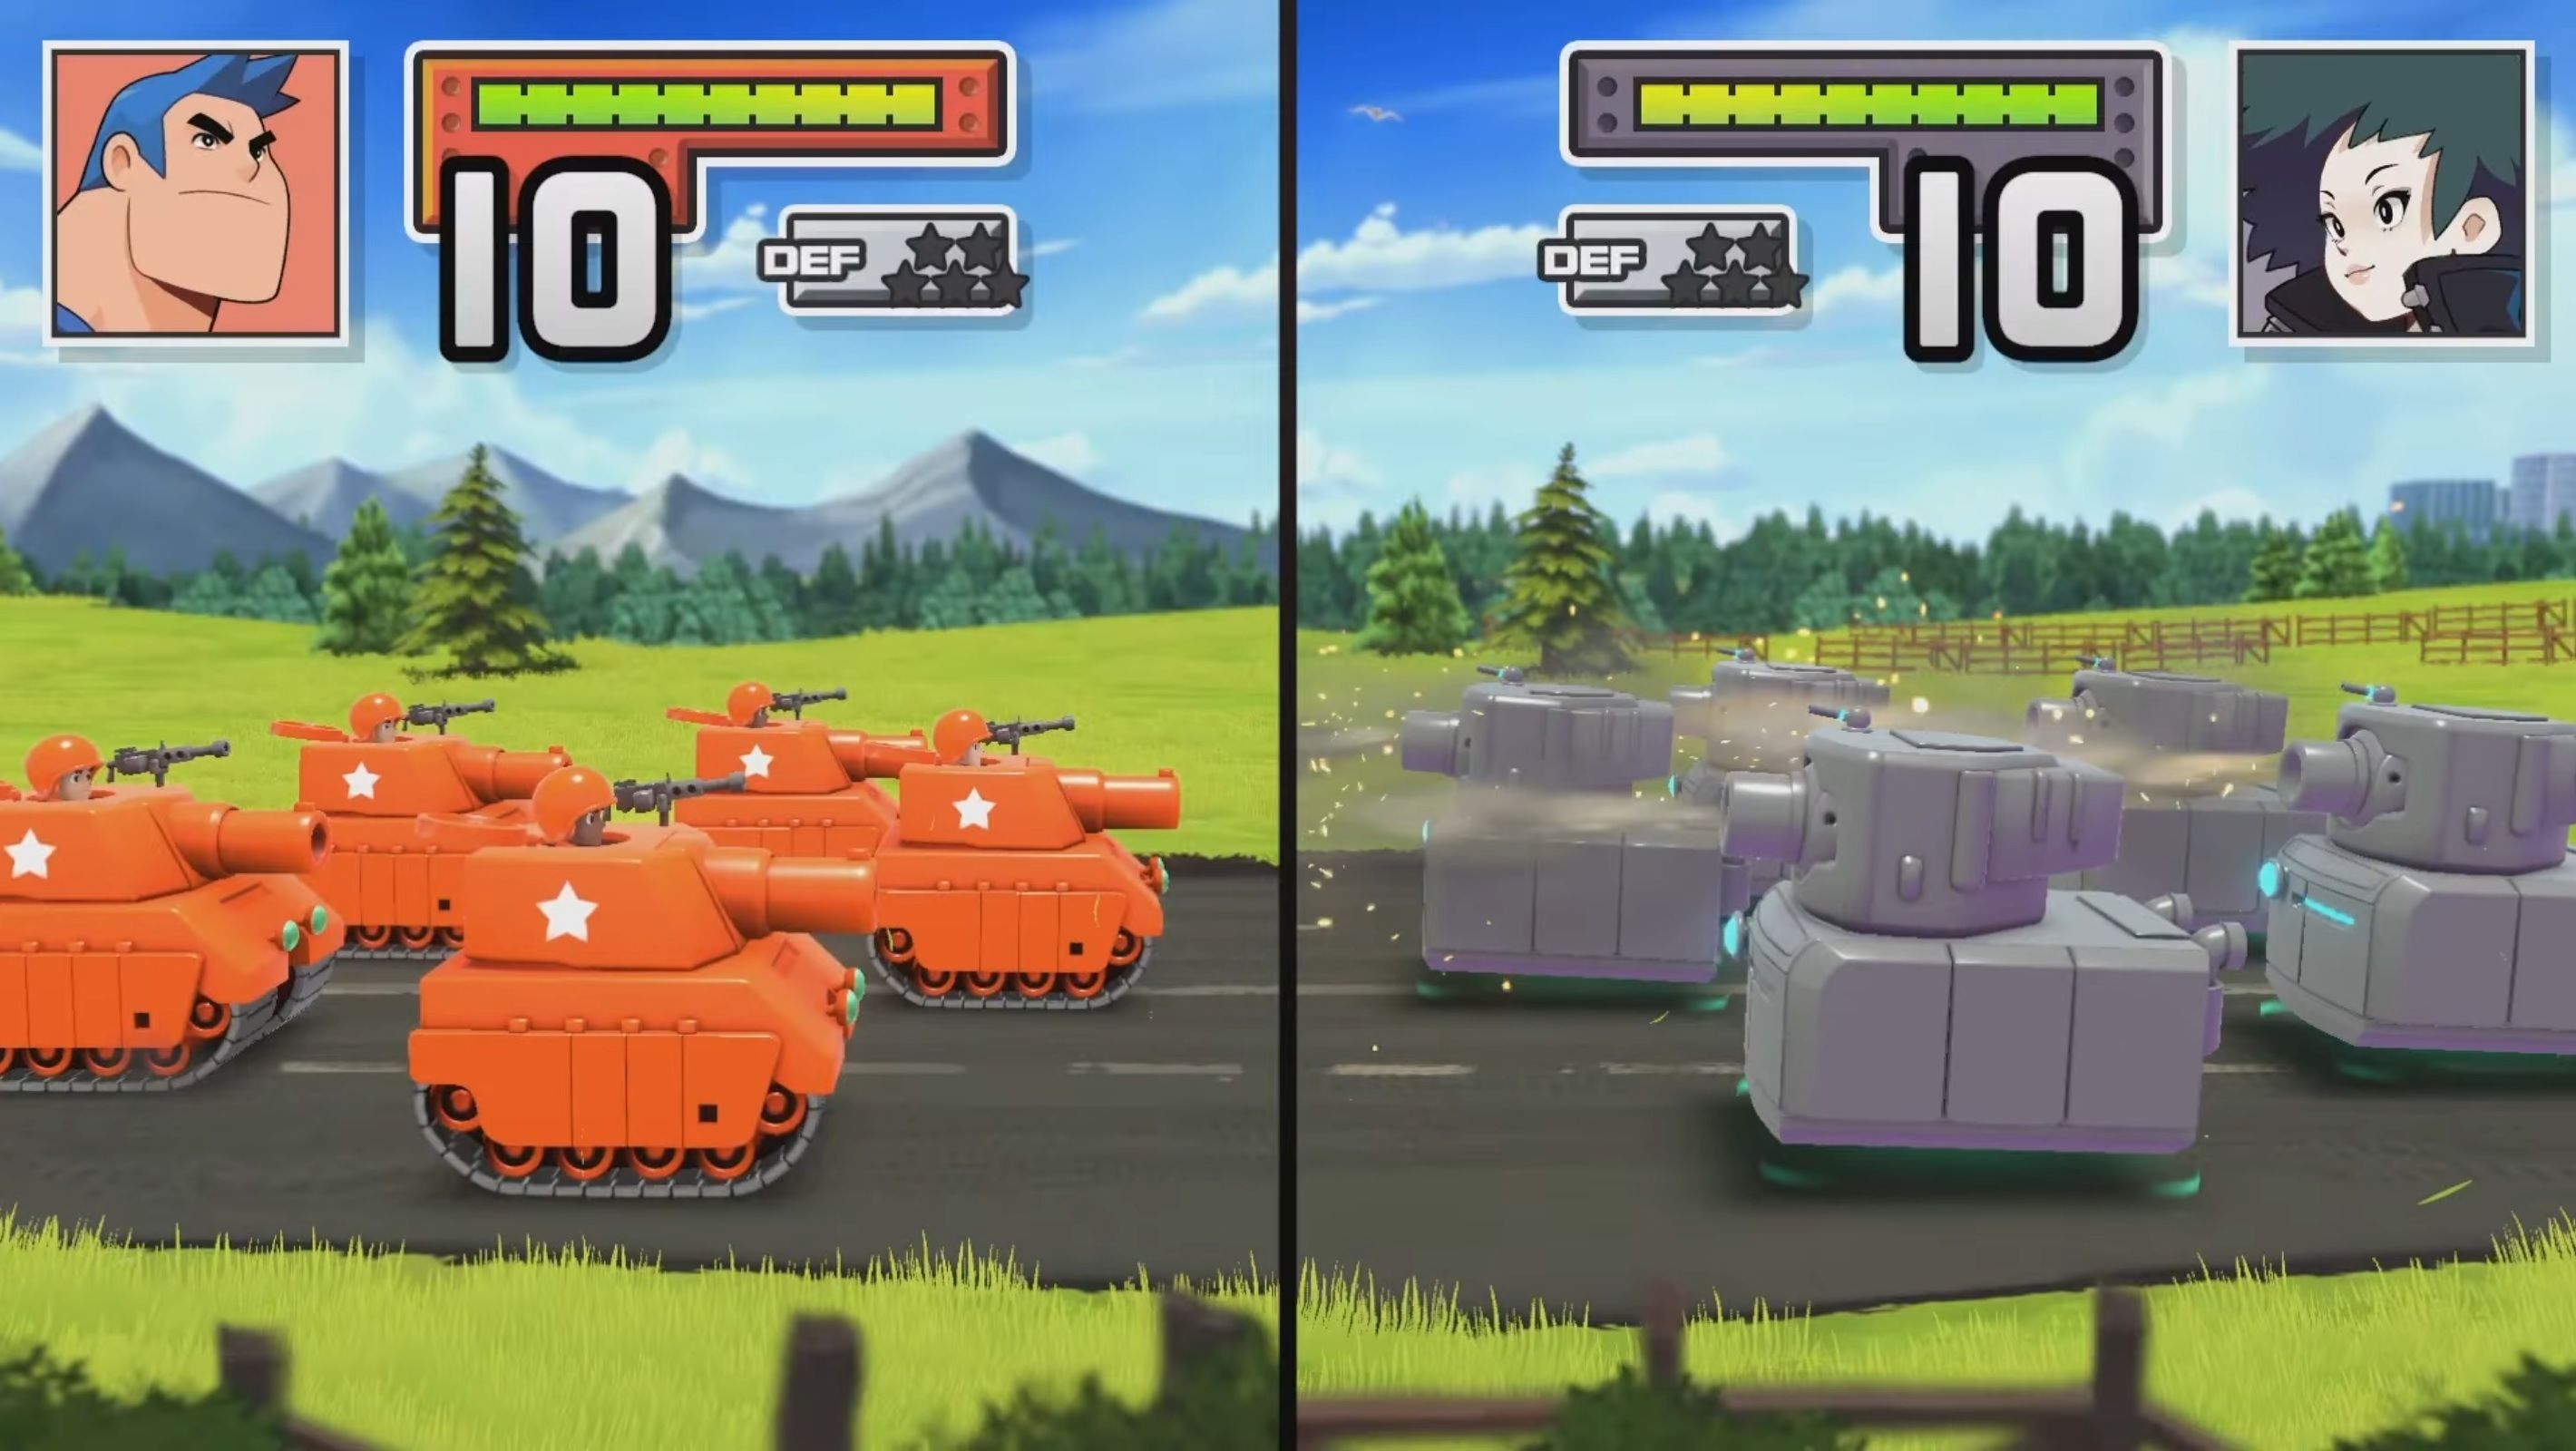 Advance Wars 1+2 Re-Boot Camp: an enjoyable remake tempered by